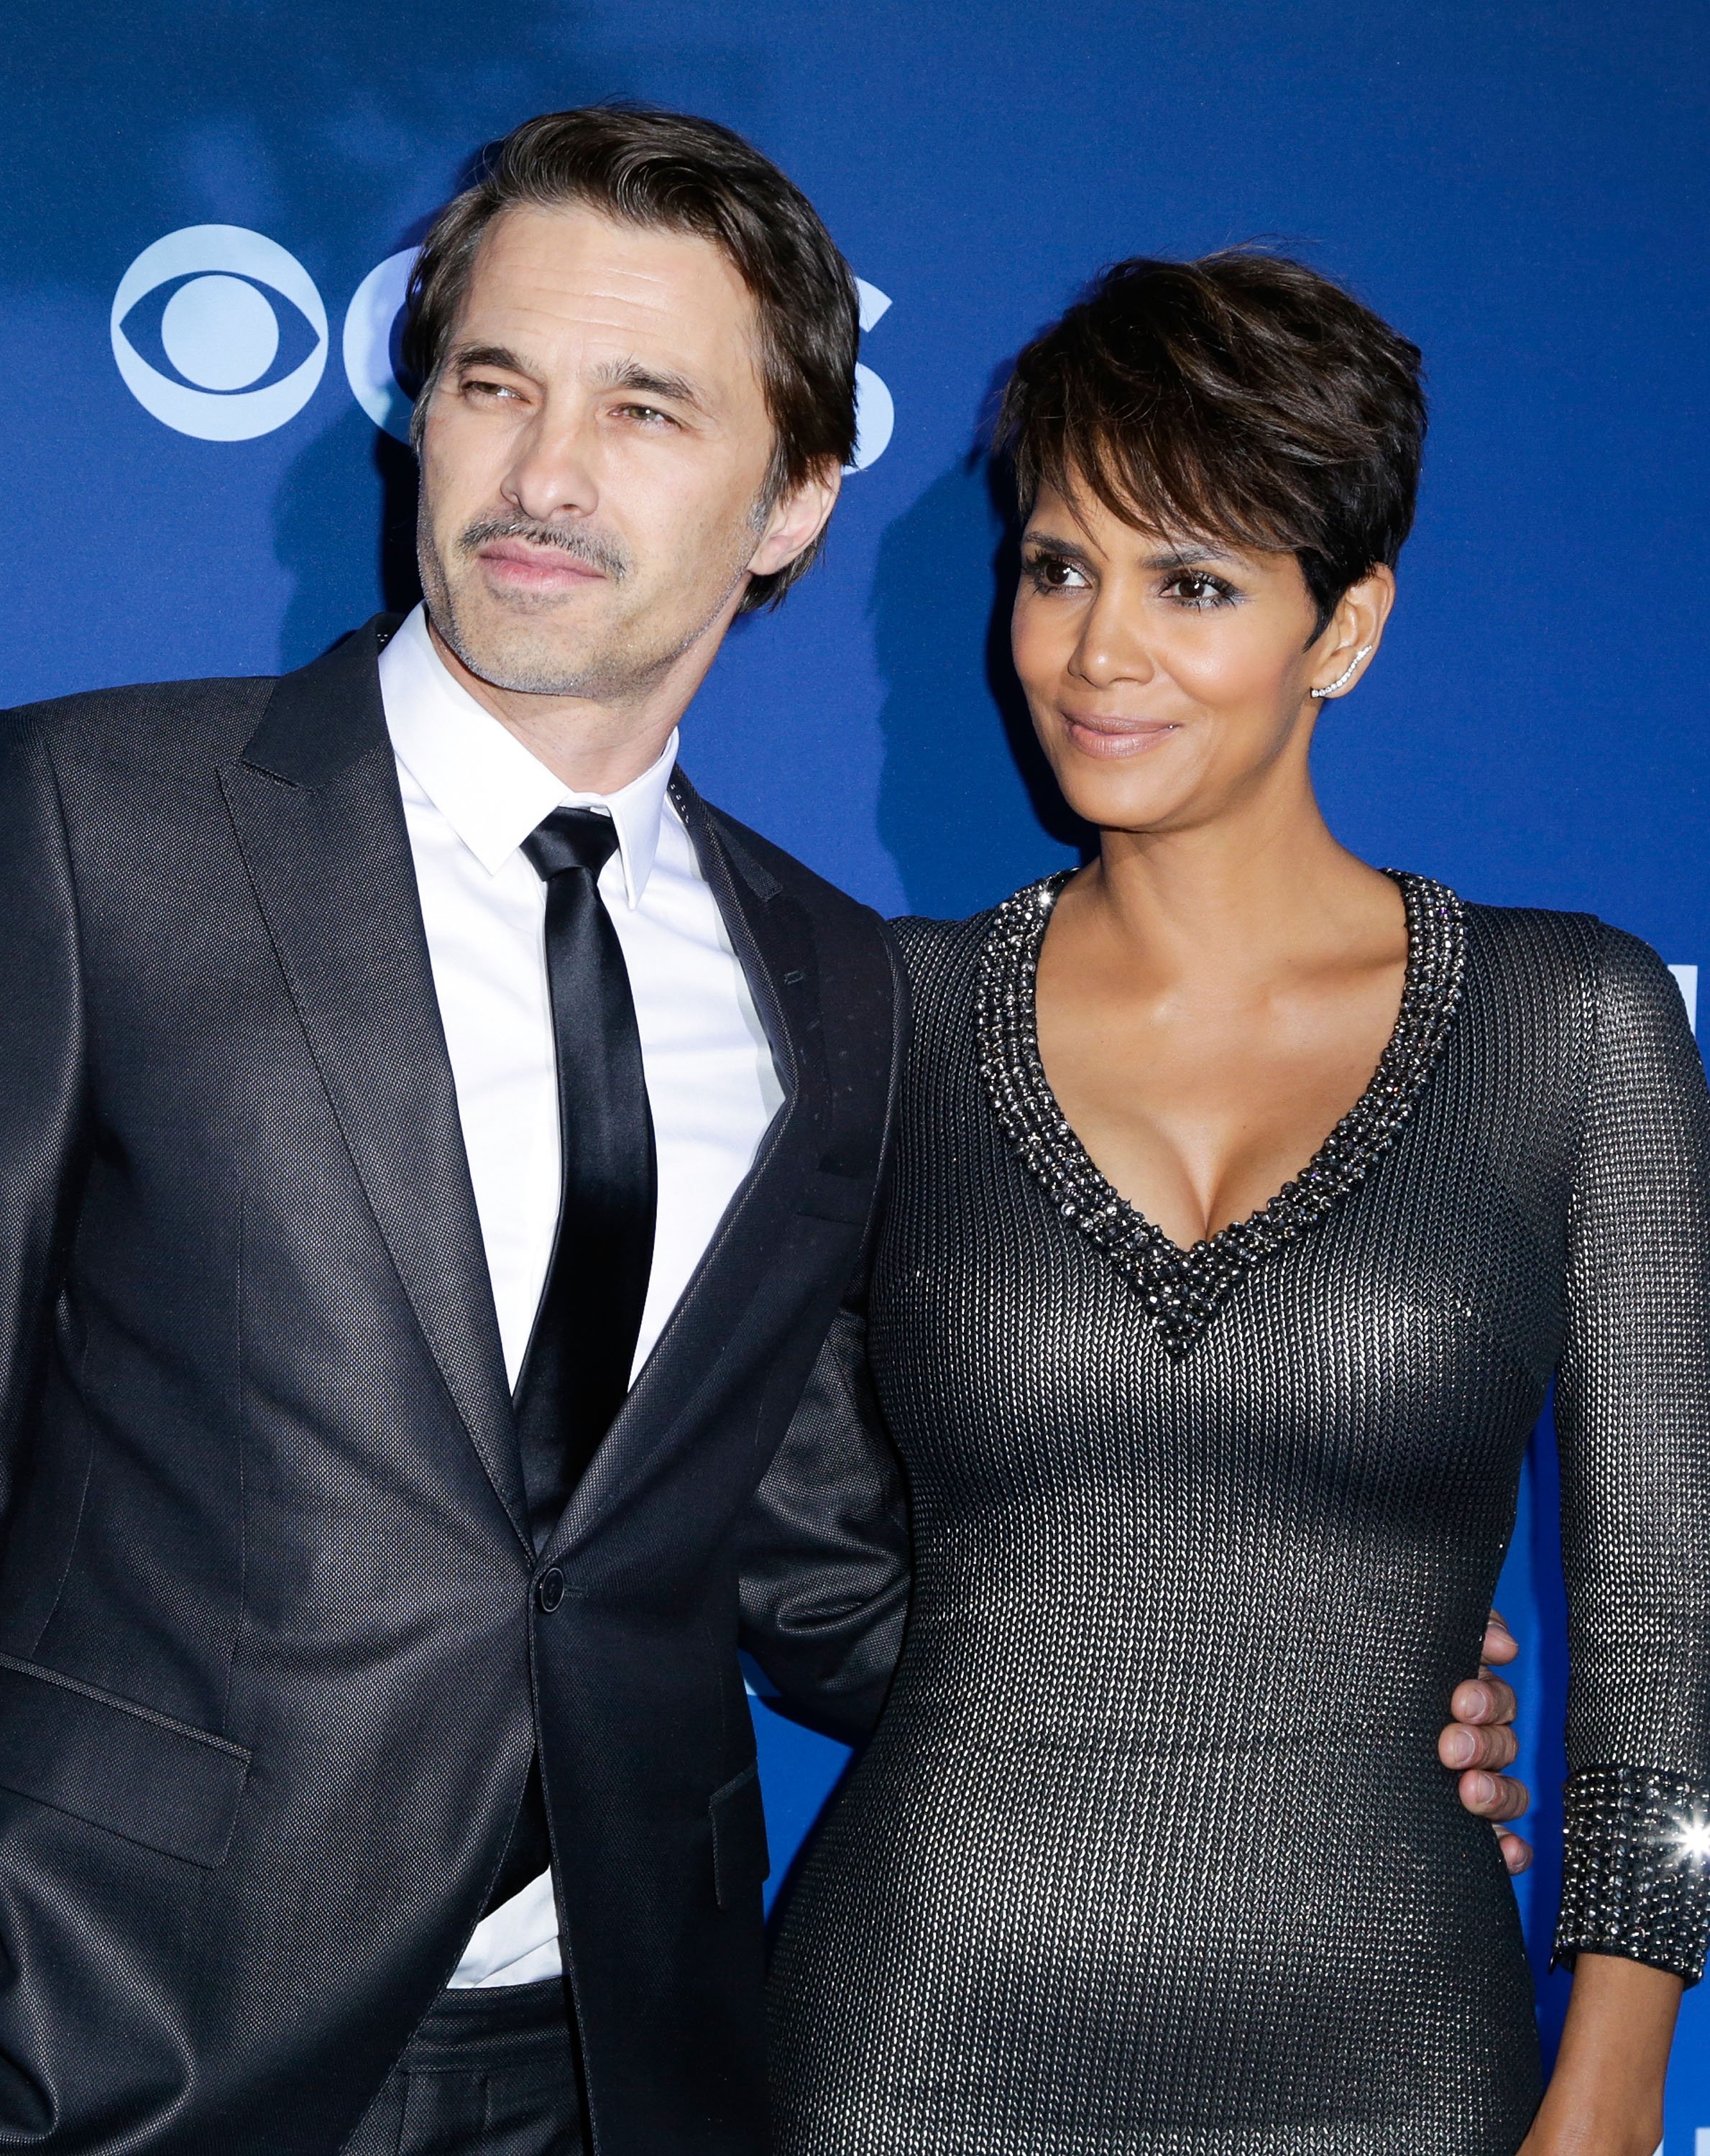 Olivier Martinez and Halle Berry at the Los Angeles premiere of "Extant" at Samuel Oschin Space Shuttle Endeavour Display Pavilionin Los Angeles, California | Photo: Vincent Sandoval/WireImage via Getty Images